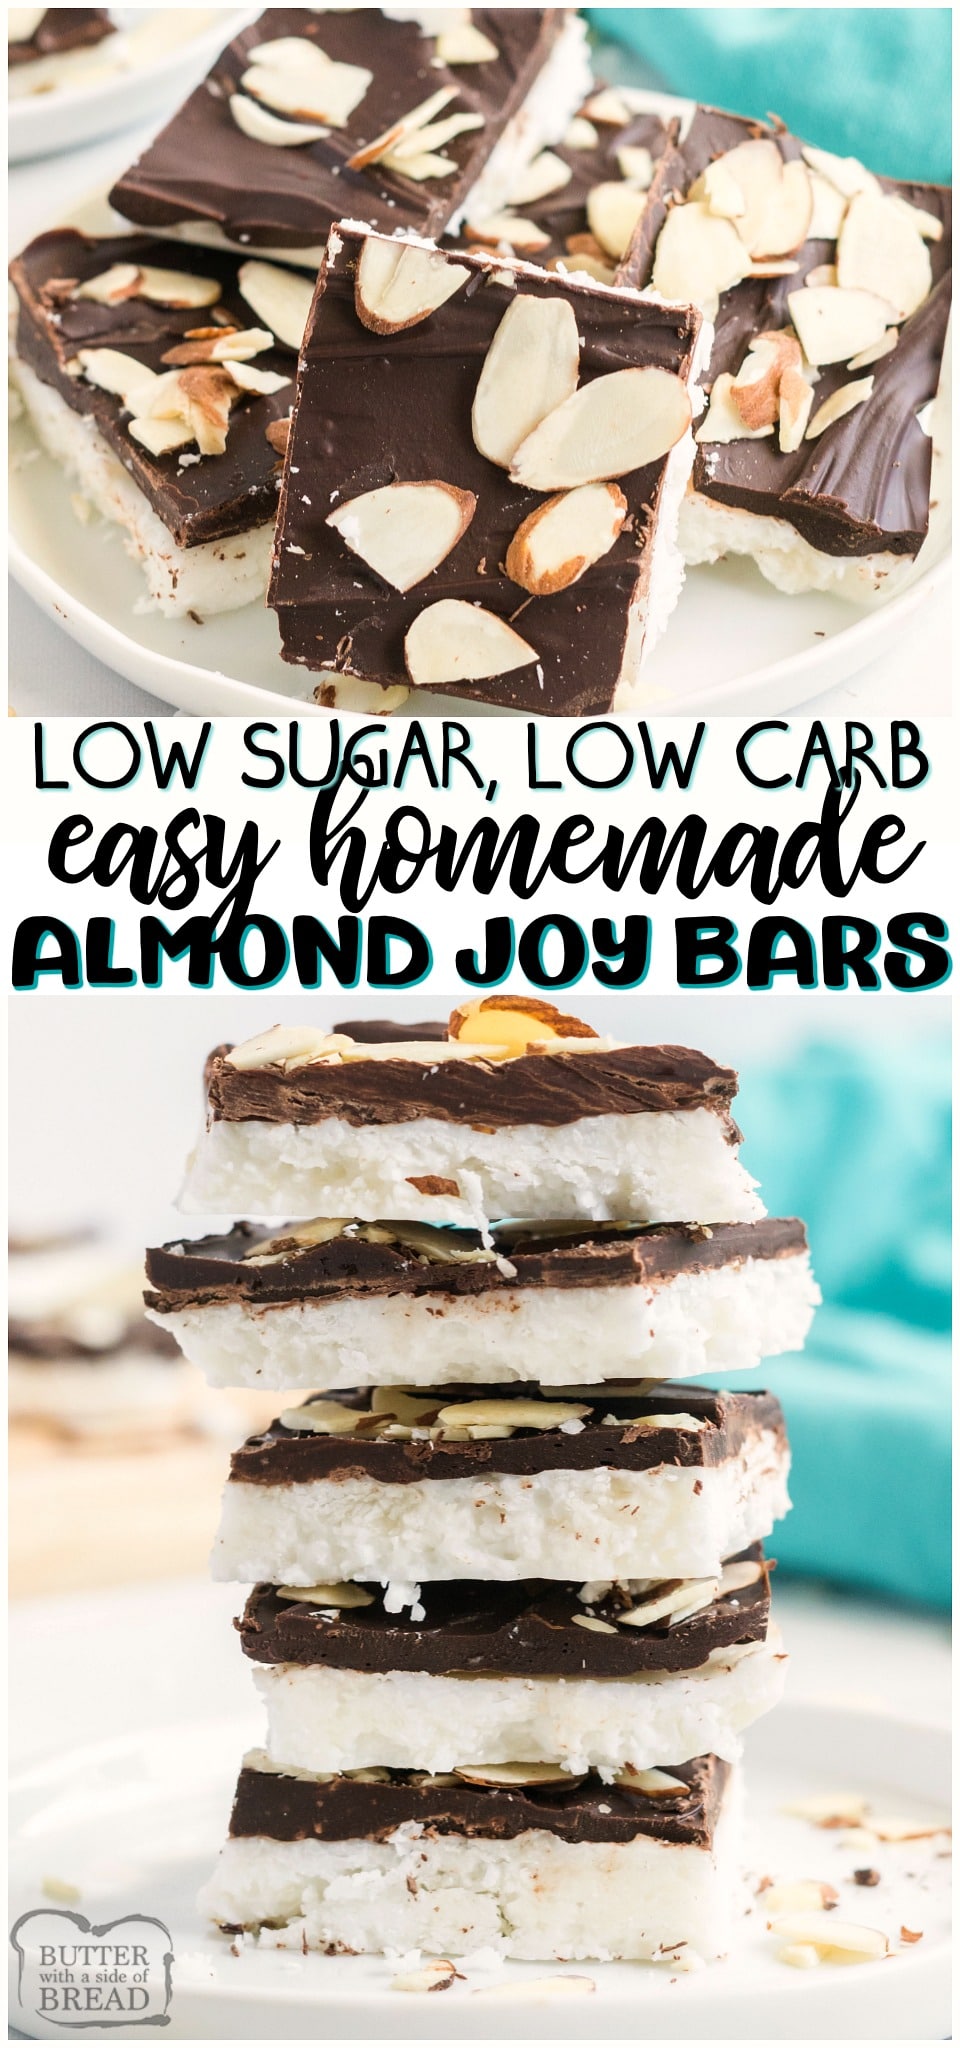 Homemade Almond Joy Bars made EASY with just 5 ingredients and healthier than store-bought! Fantastic low carb, low sugar treat for chocolate coconut lovers.  #lowcarb #lowsugar #chocolate #coconut #candy #homemade #dessert #nobake #recipe from BUTTER WITH A SIDE OF BREAD